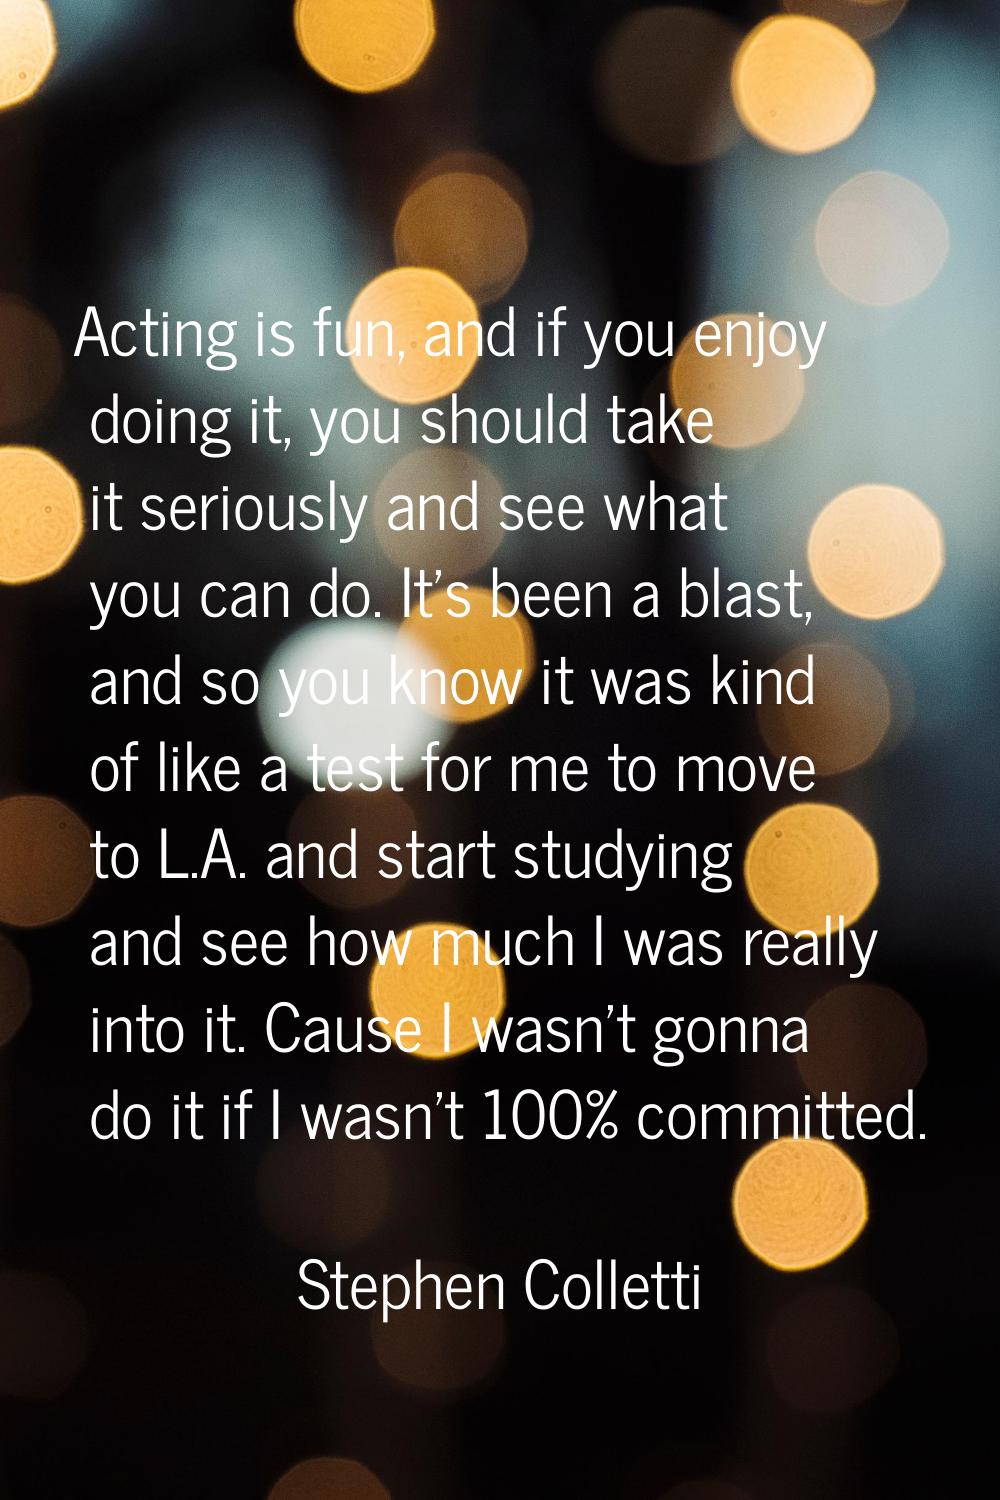 Acting is fun, and if you enjoy doing it, you should take it seriously and see what you can do. It'